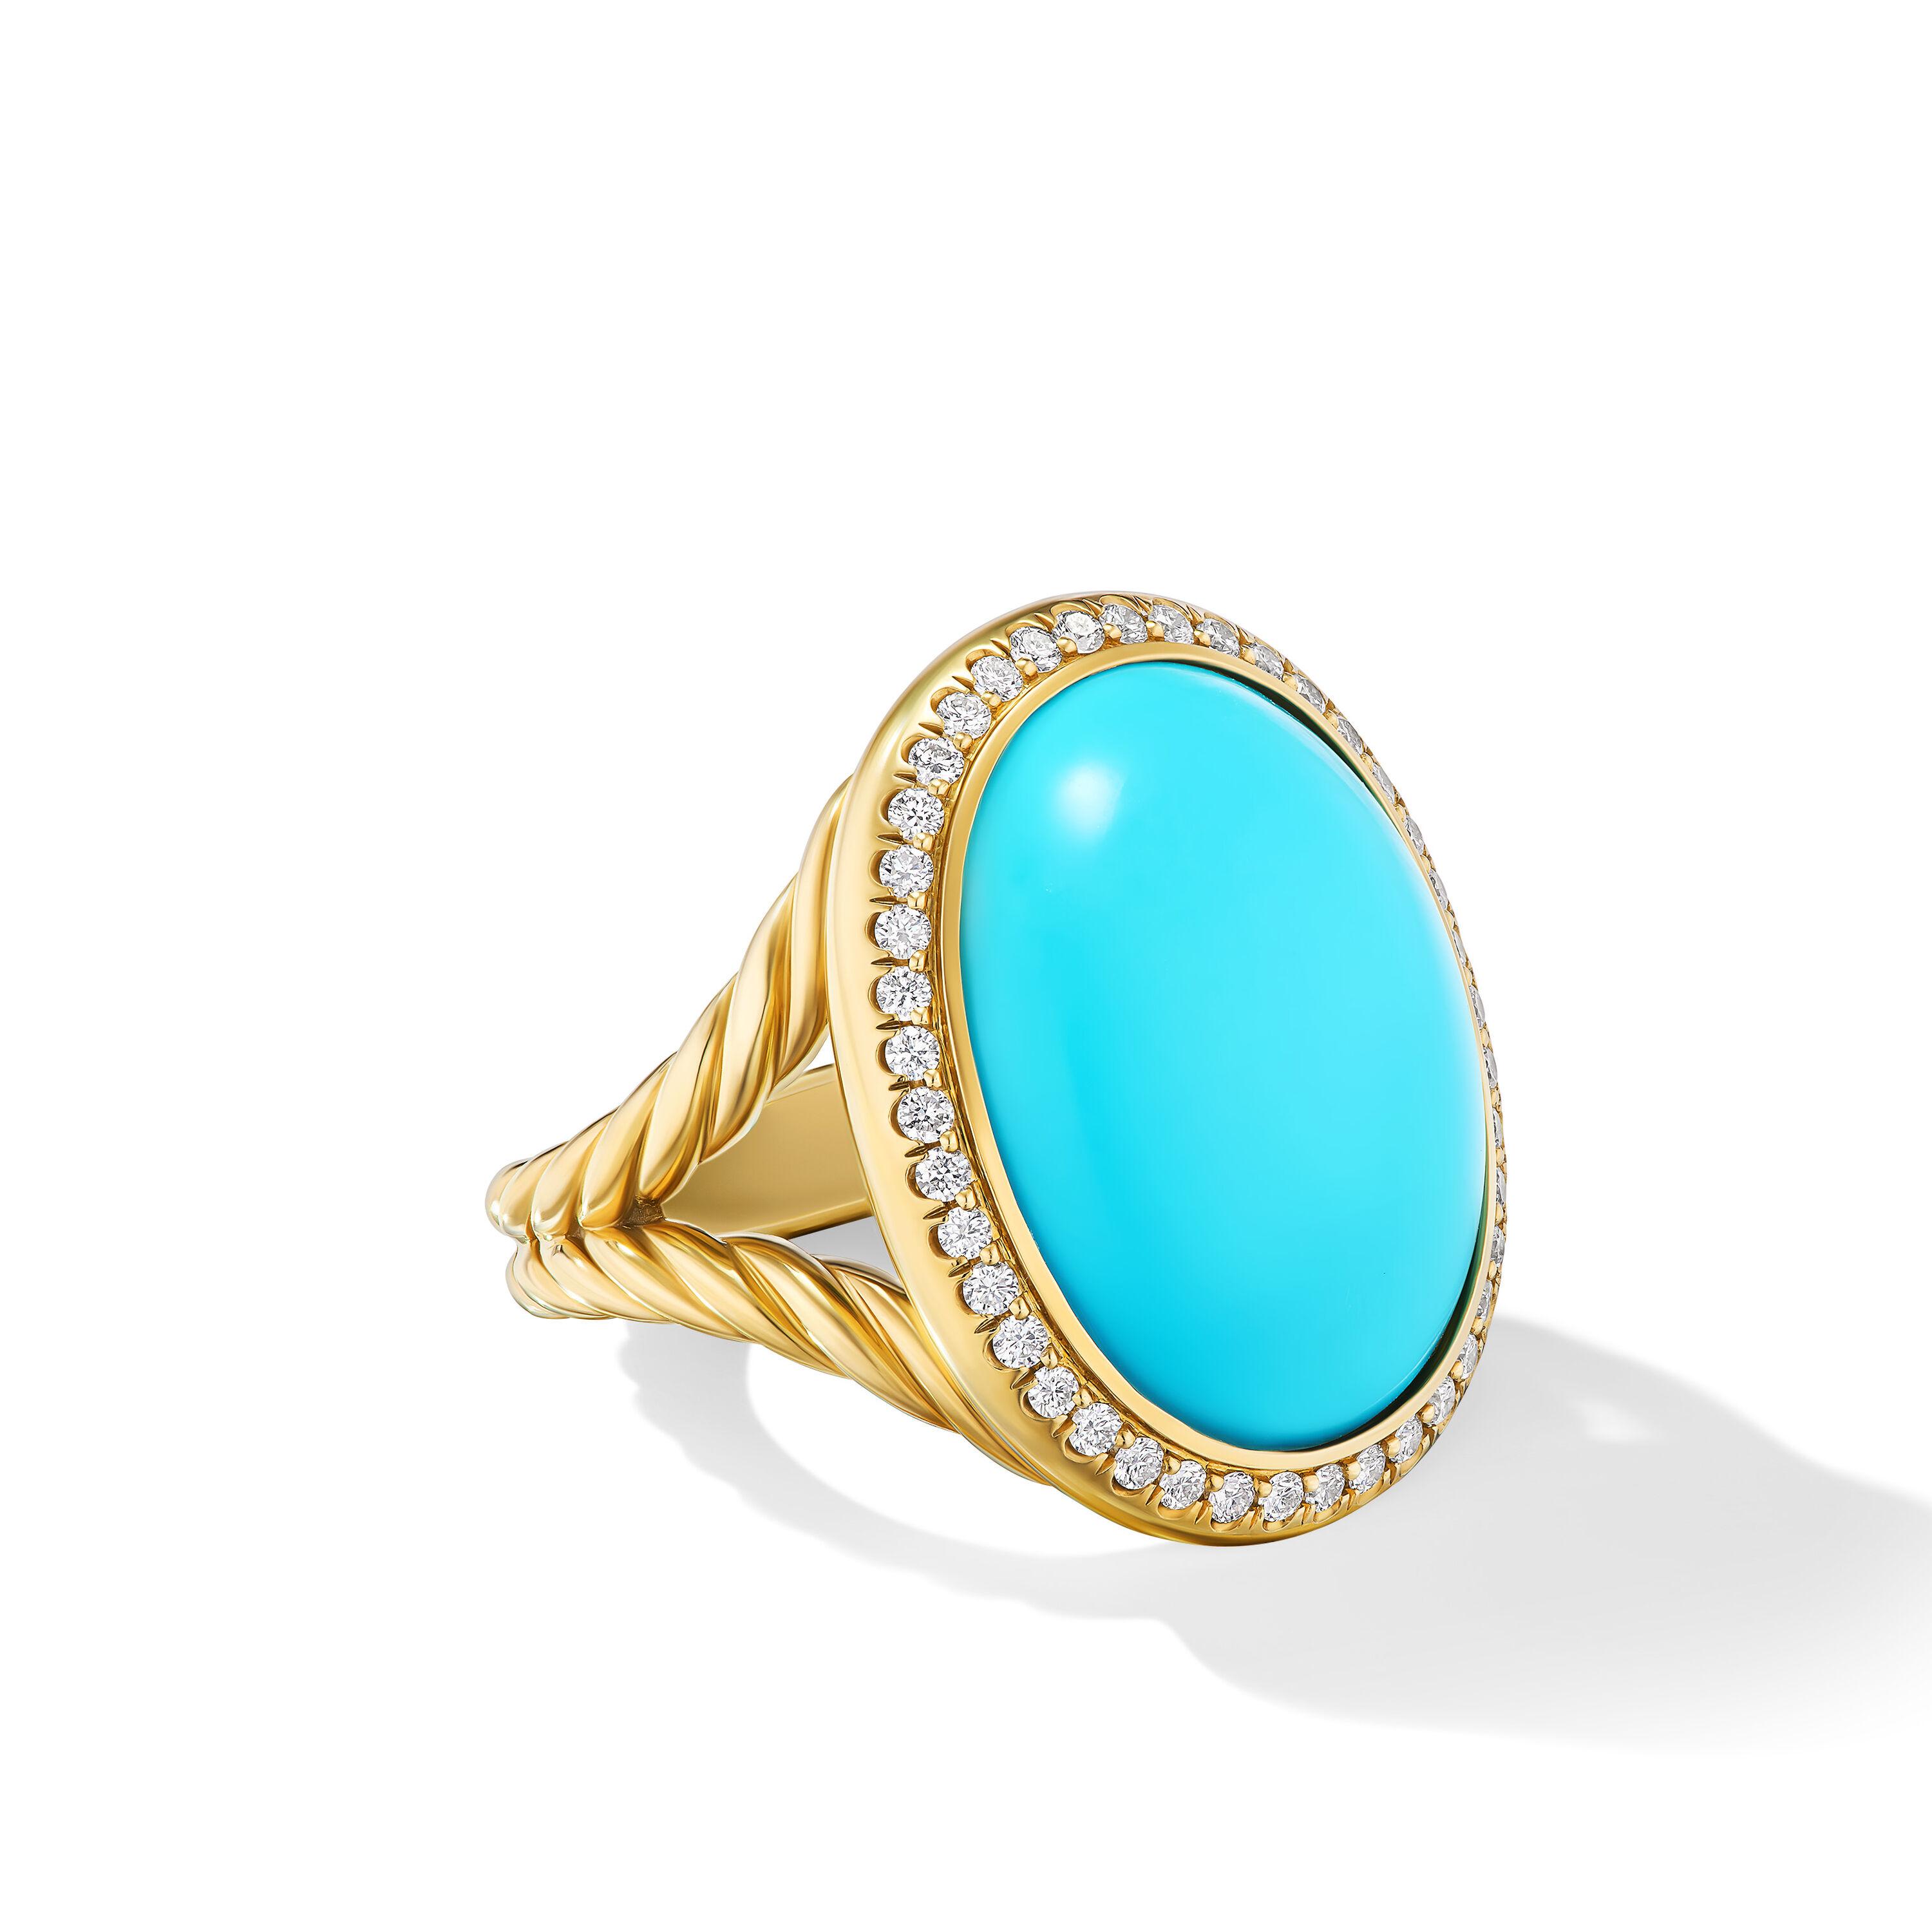 David Yurman Albion Oval Ring in 18K Yellow Gold with Turquoise and Diamonds